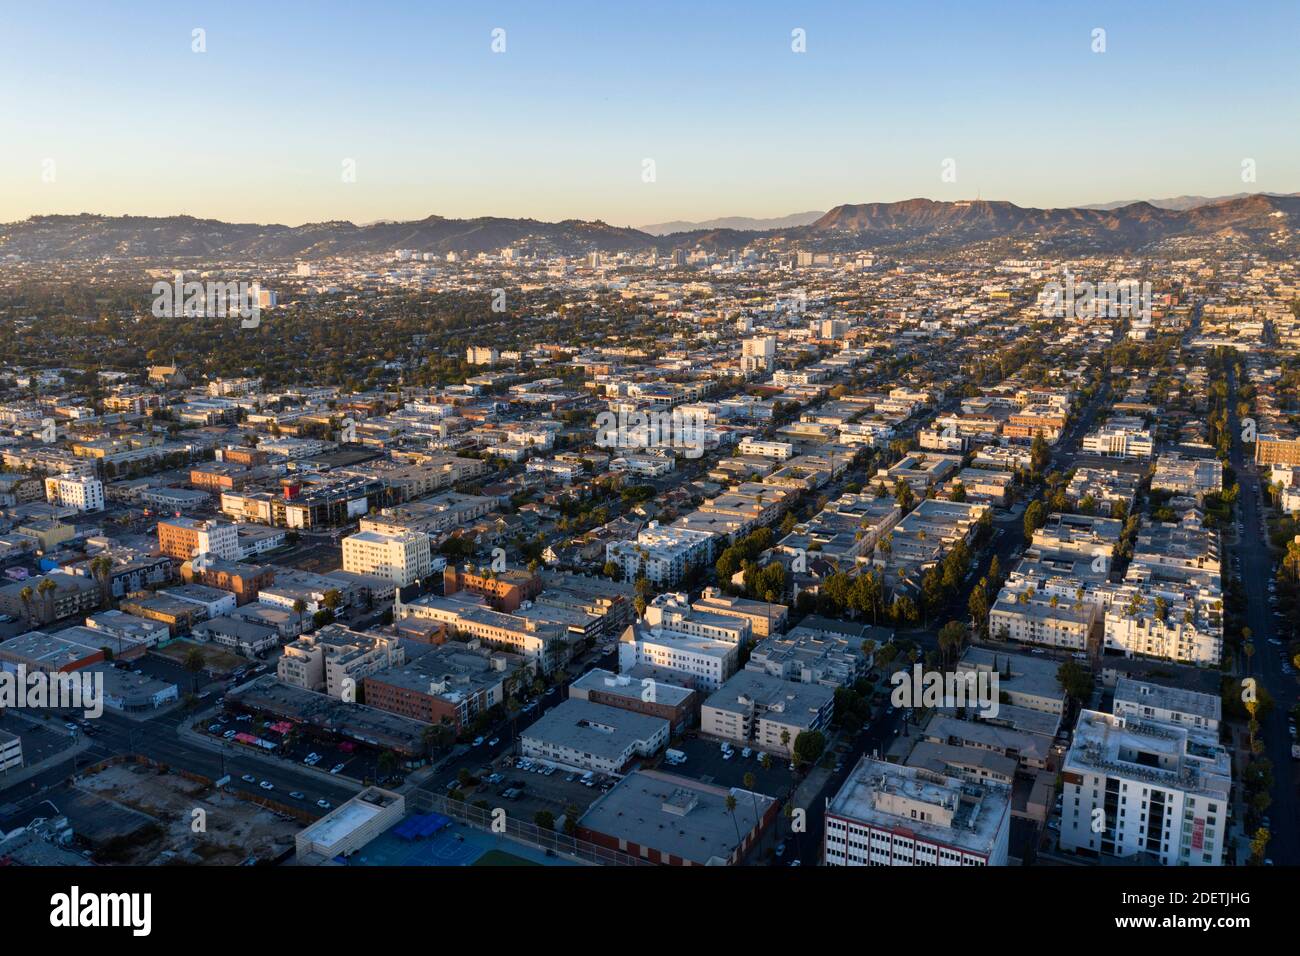 Aerial view of urban central Los Angeles looking across the city towards Hollywood Stock Photo